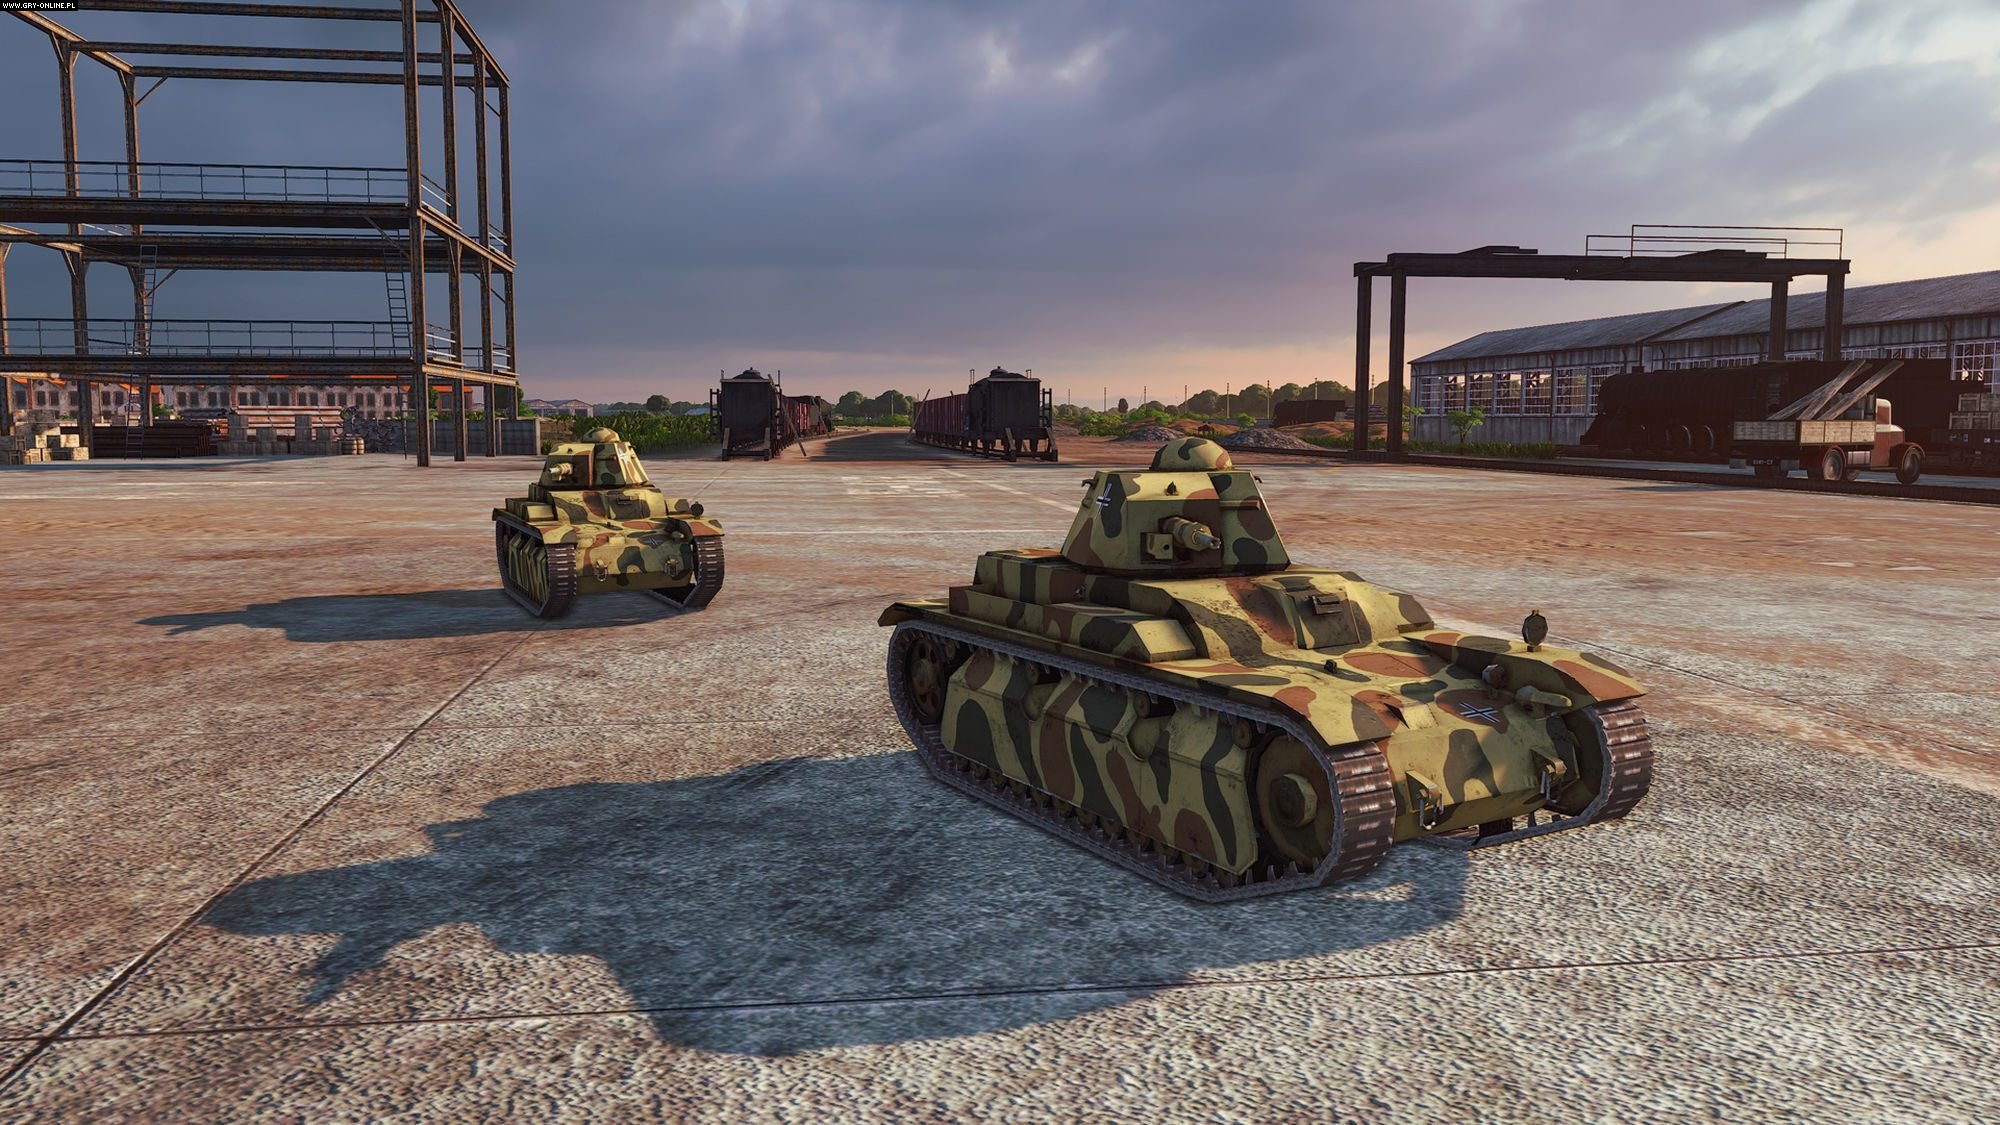 download steel division normandy for free